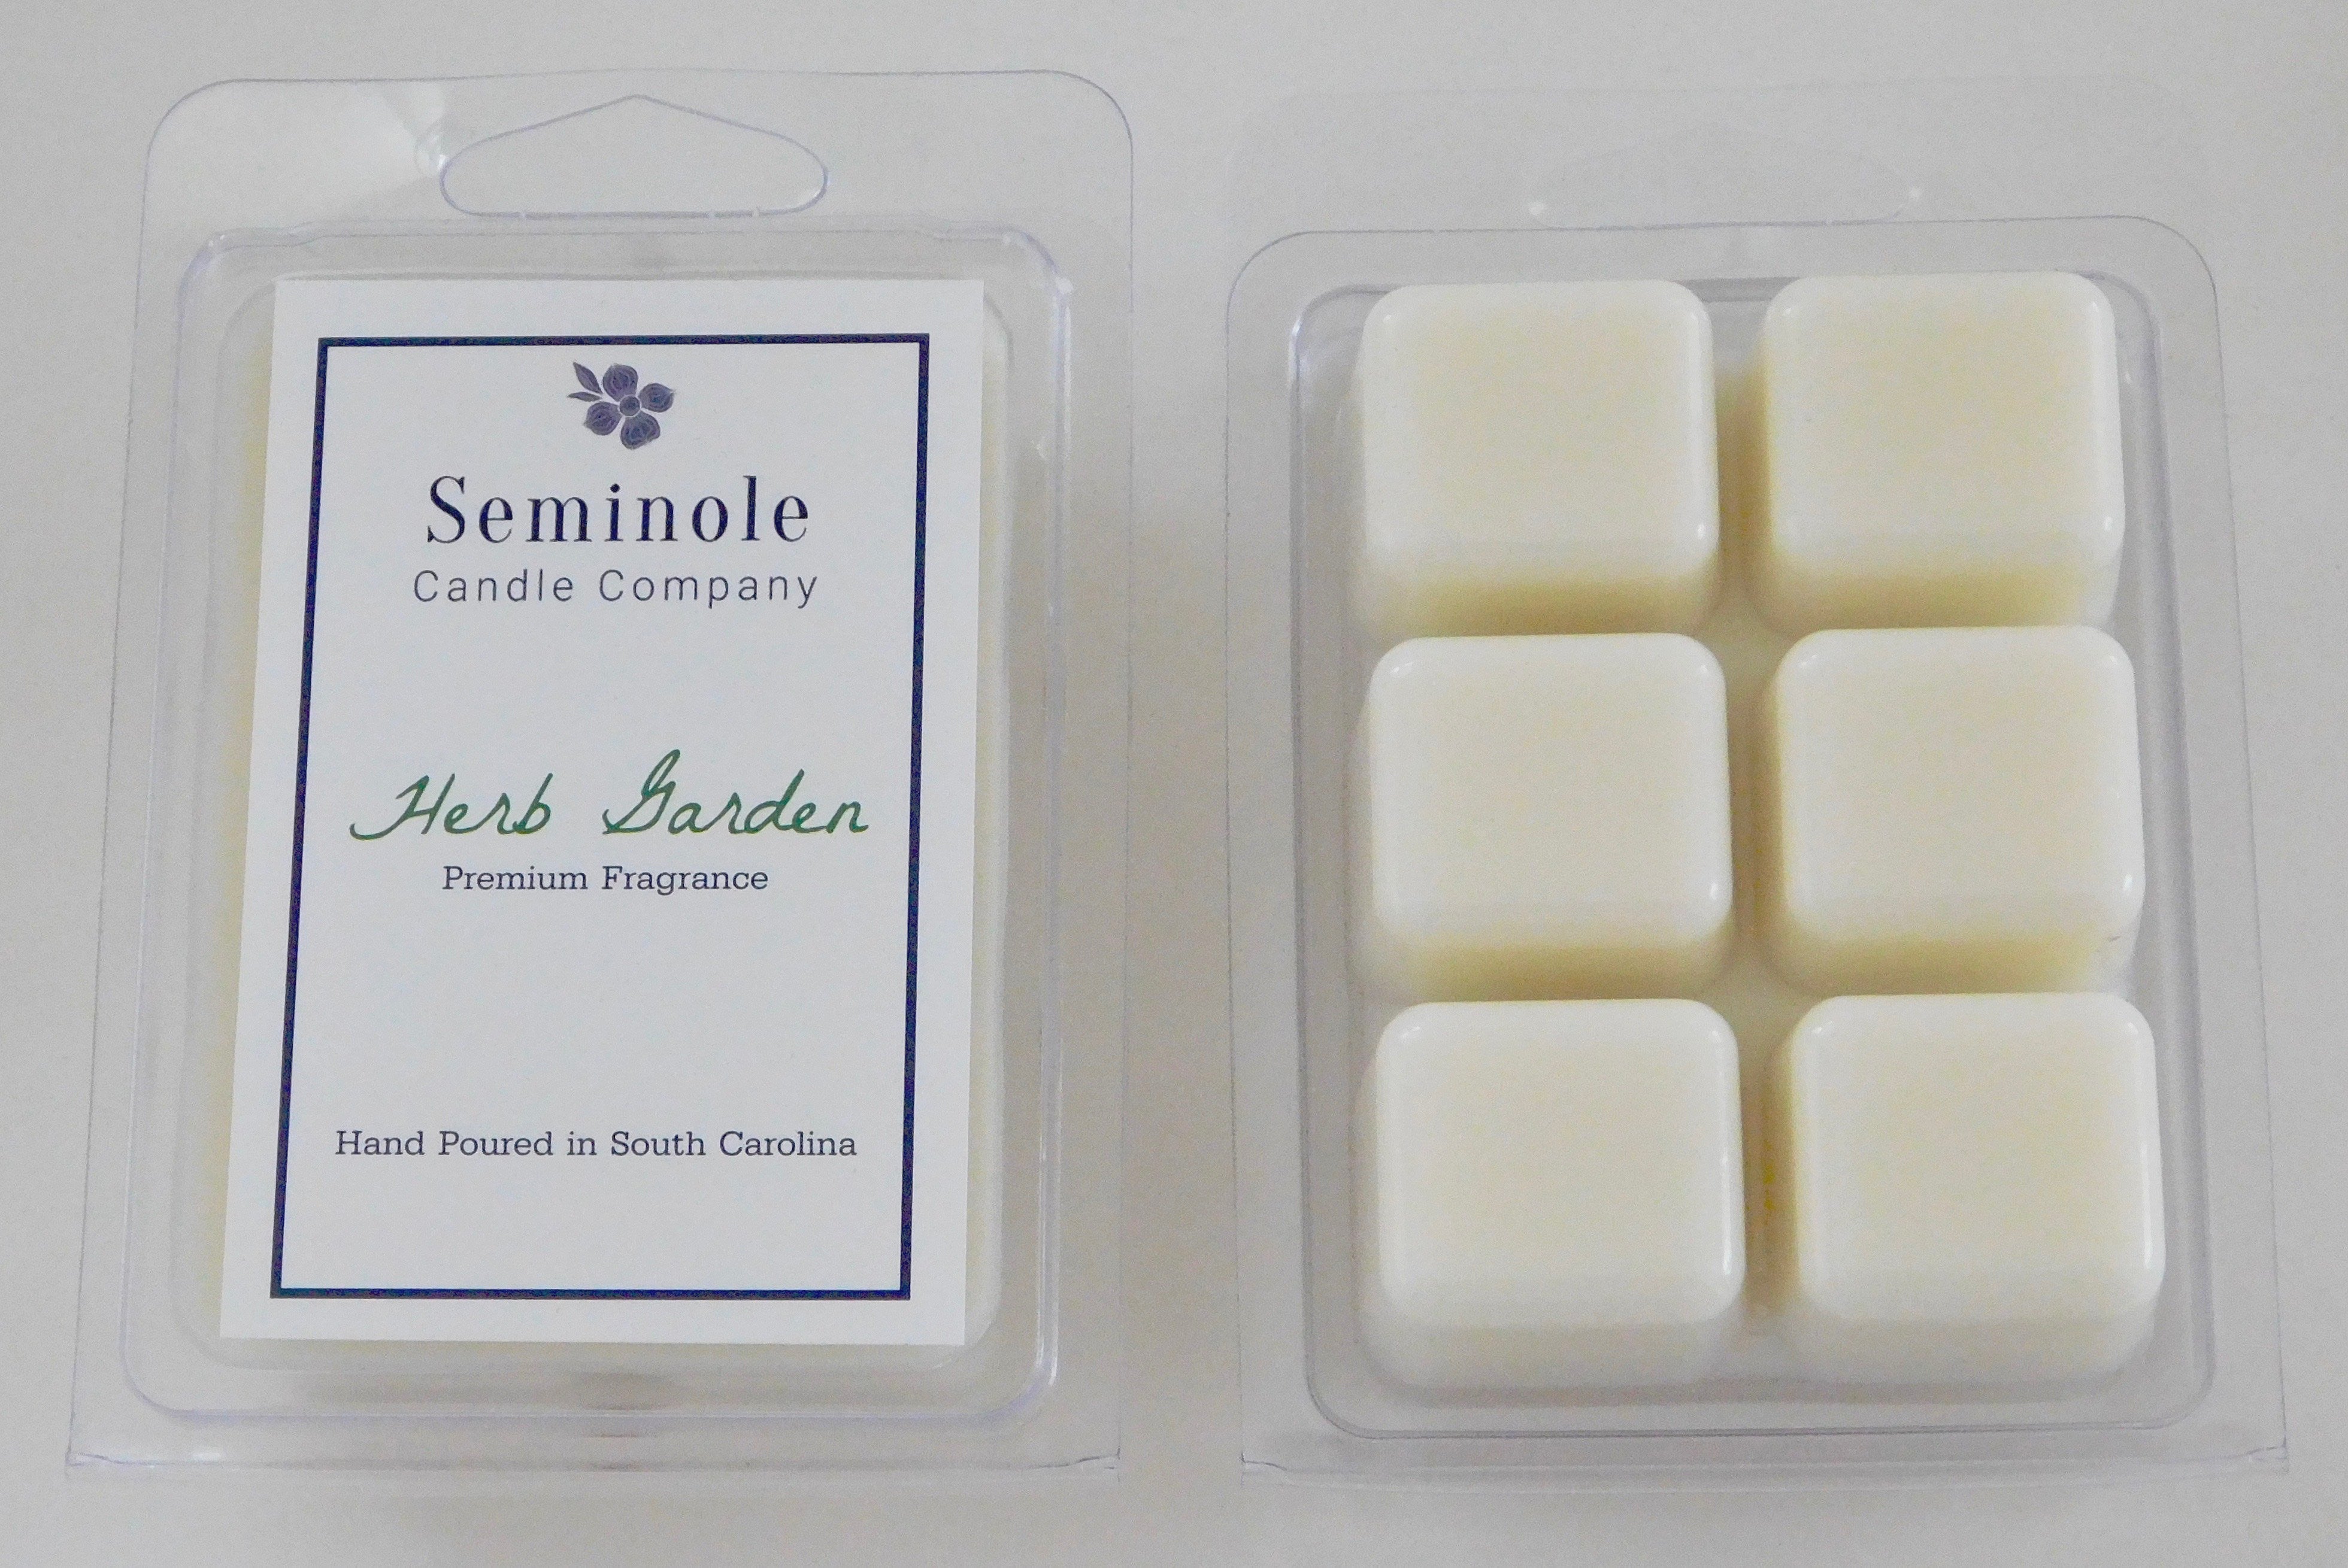 Japanese Garden Soy Wax Melts - Cordially Sweet Candle Co.